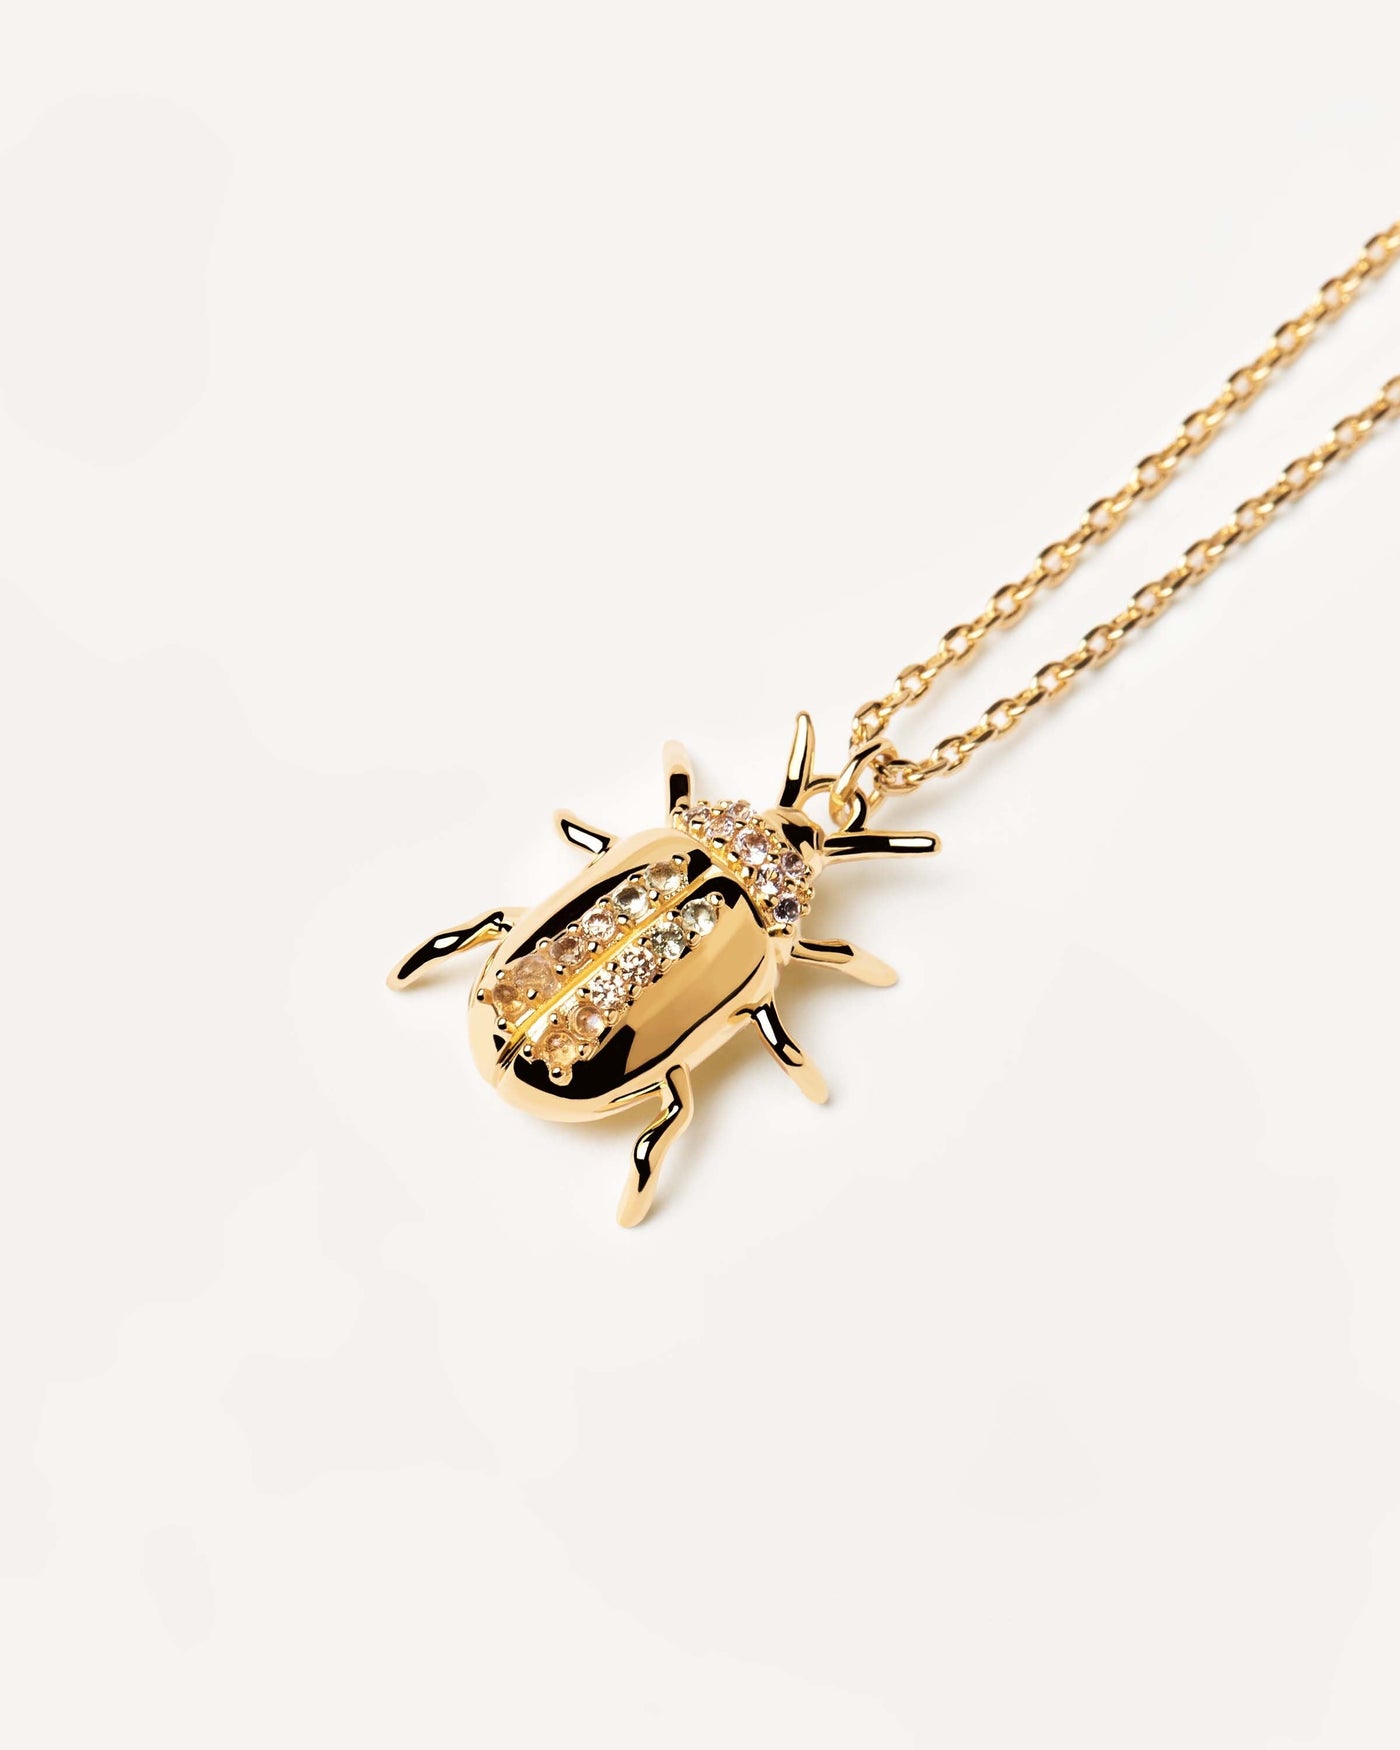 2023 Selection | Balance Beetle Gold Necklace. Get the latest arrival from PDPAOLA. Place your order safely and get this Best Seller. Free Shipping over 40€